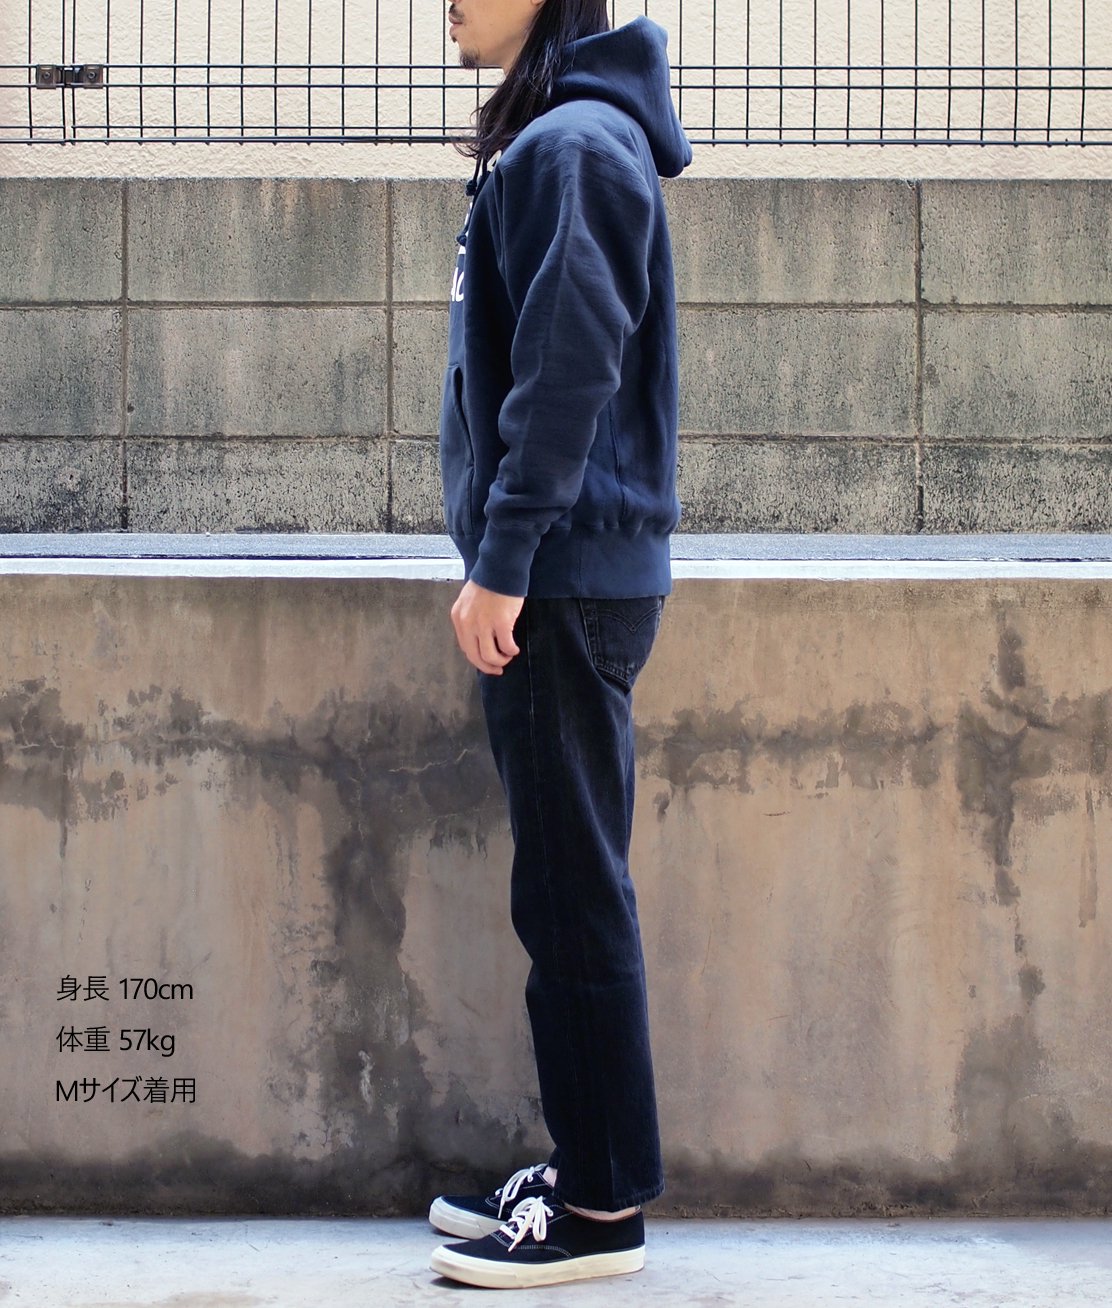 【Champion-TRUE TO ARCHIVES】C3-Y117 RW HOODED SWEAT - NAVY リバースウィーブ パーカー 日本製  - HUNKY DORY | LEVI'S VINTAGE ...